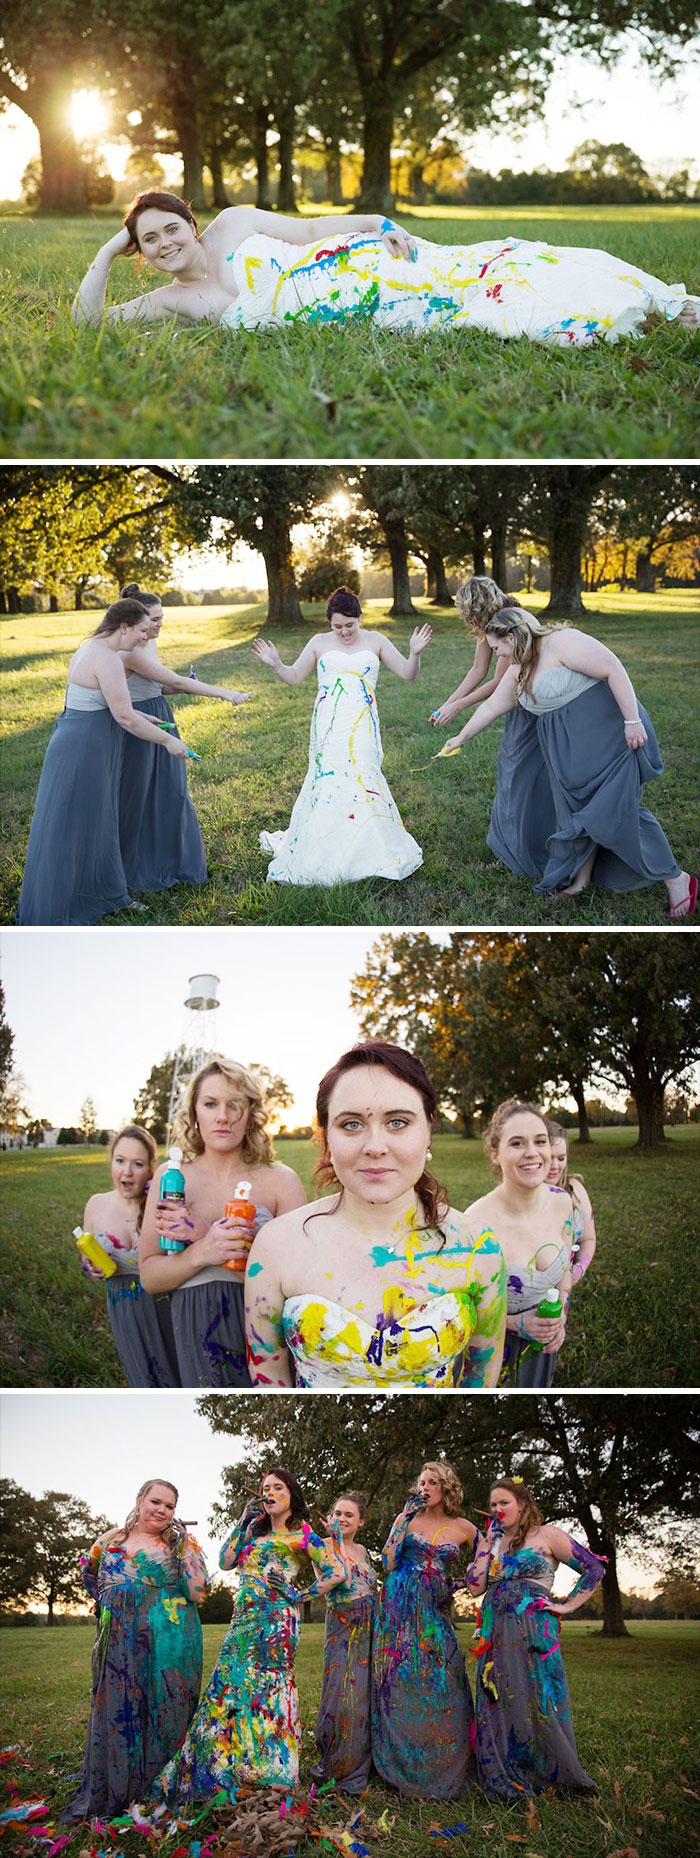 50 Of The Funniest Moments From Weddings | Bored Panda